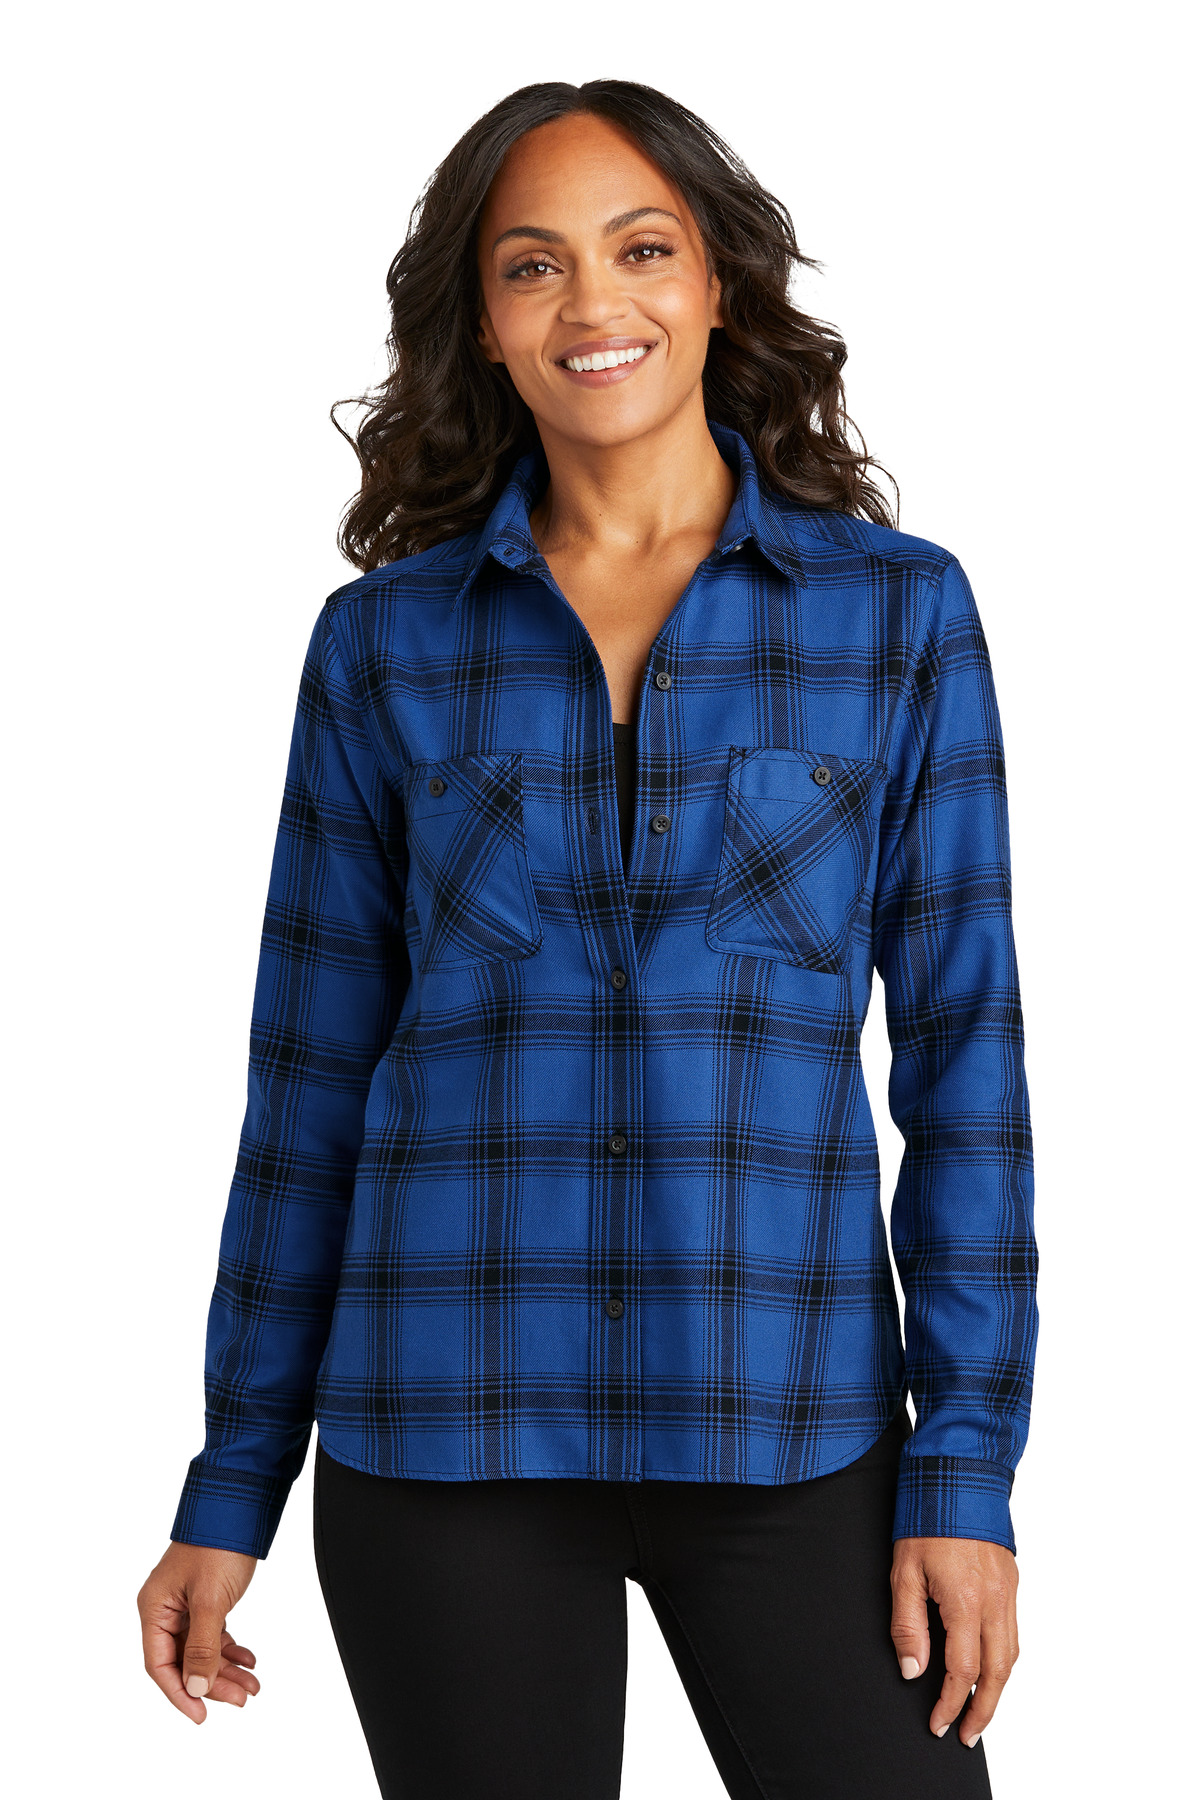 click to view Royal/ Black Open Plaid